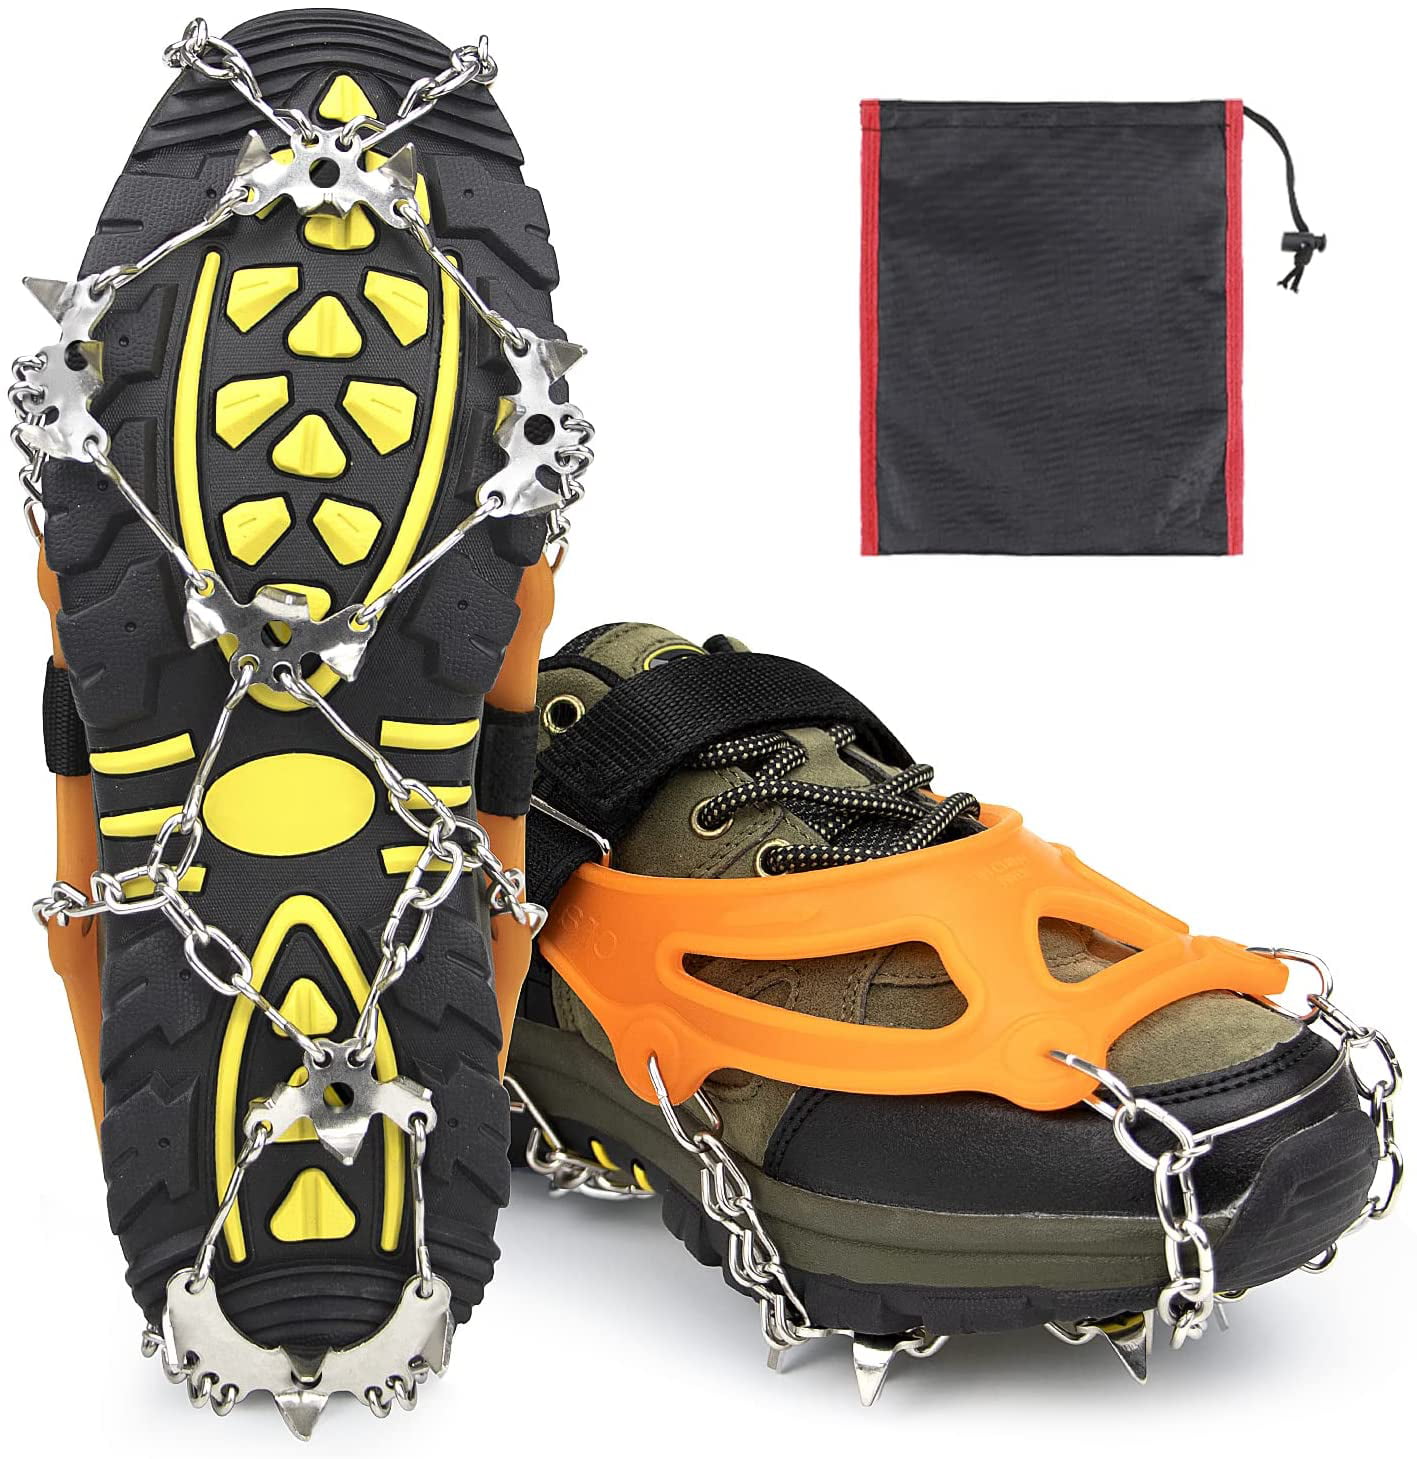 SYOURSELF Crampons Ice Cleats 24 Steel Spikes Snow Grips Ice Grippers Traction Anti-Slip Stainless Cleats for Shoes Boots Winter Outdoor Walking Jogging Climbing Hiking Fishing Running 